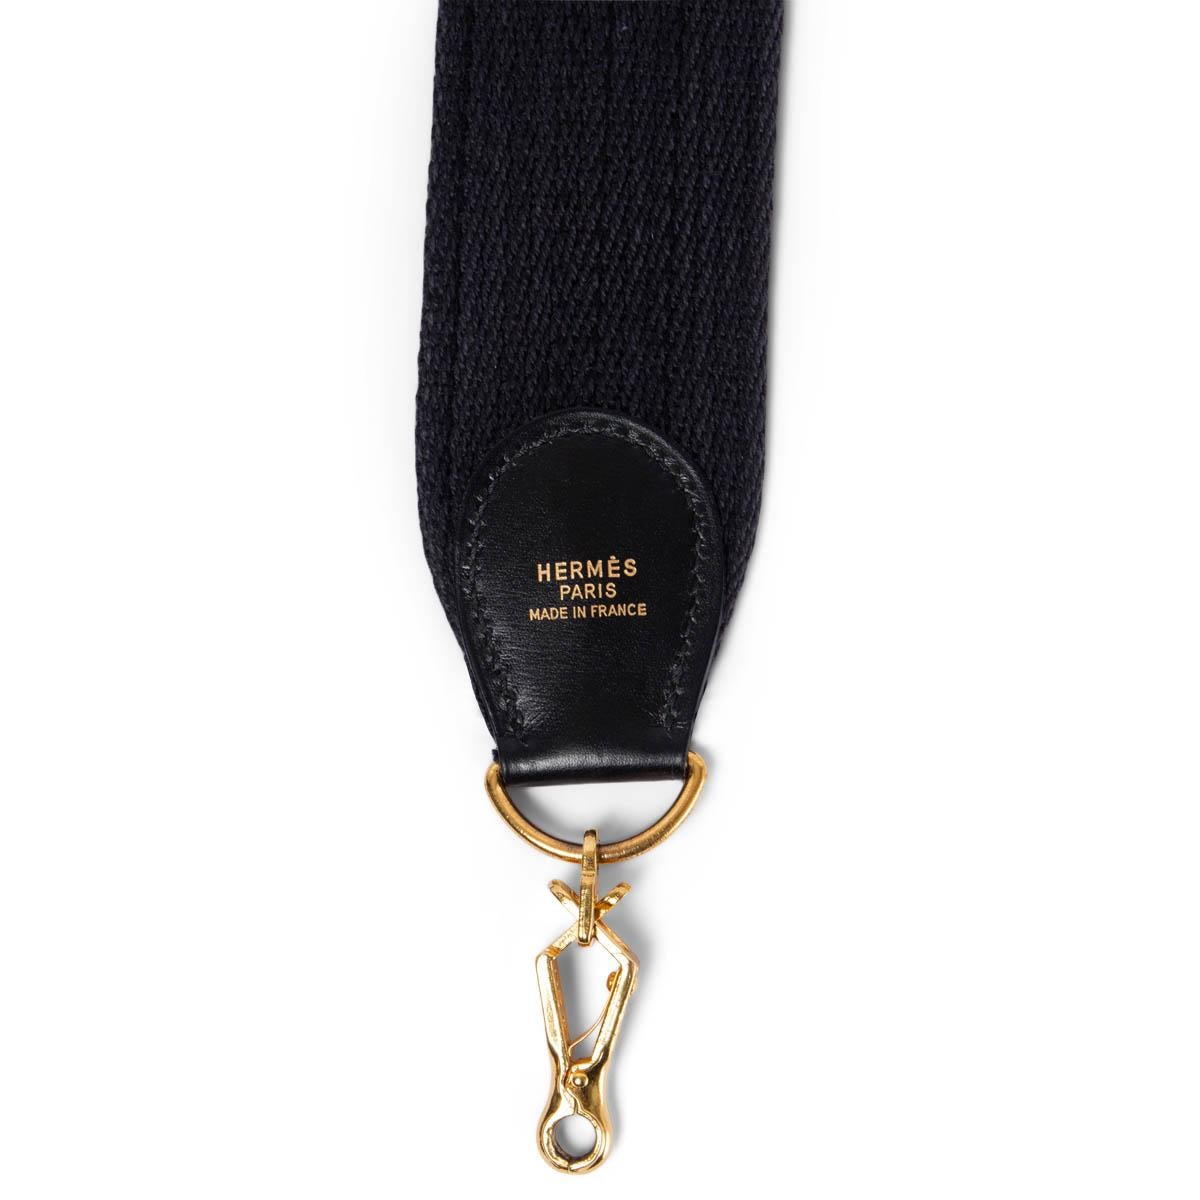 100% authentic Hermès shoulder strap for your Kelly or Evelyne bag in faded black canvas and black leather. Has been carried and is in excellent condition.

Measurements
Width	5cm (2in)
Length	110cm (42.9in)
Hardware	Gold-Tone

All our listings